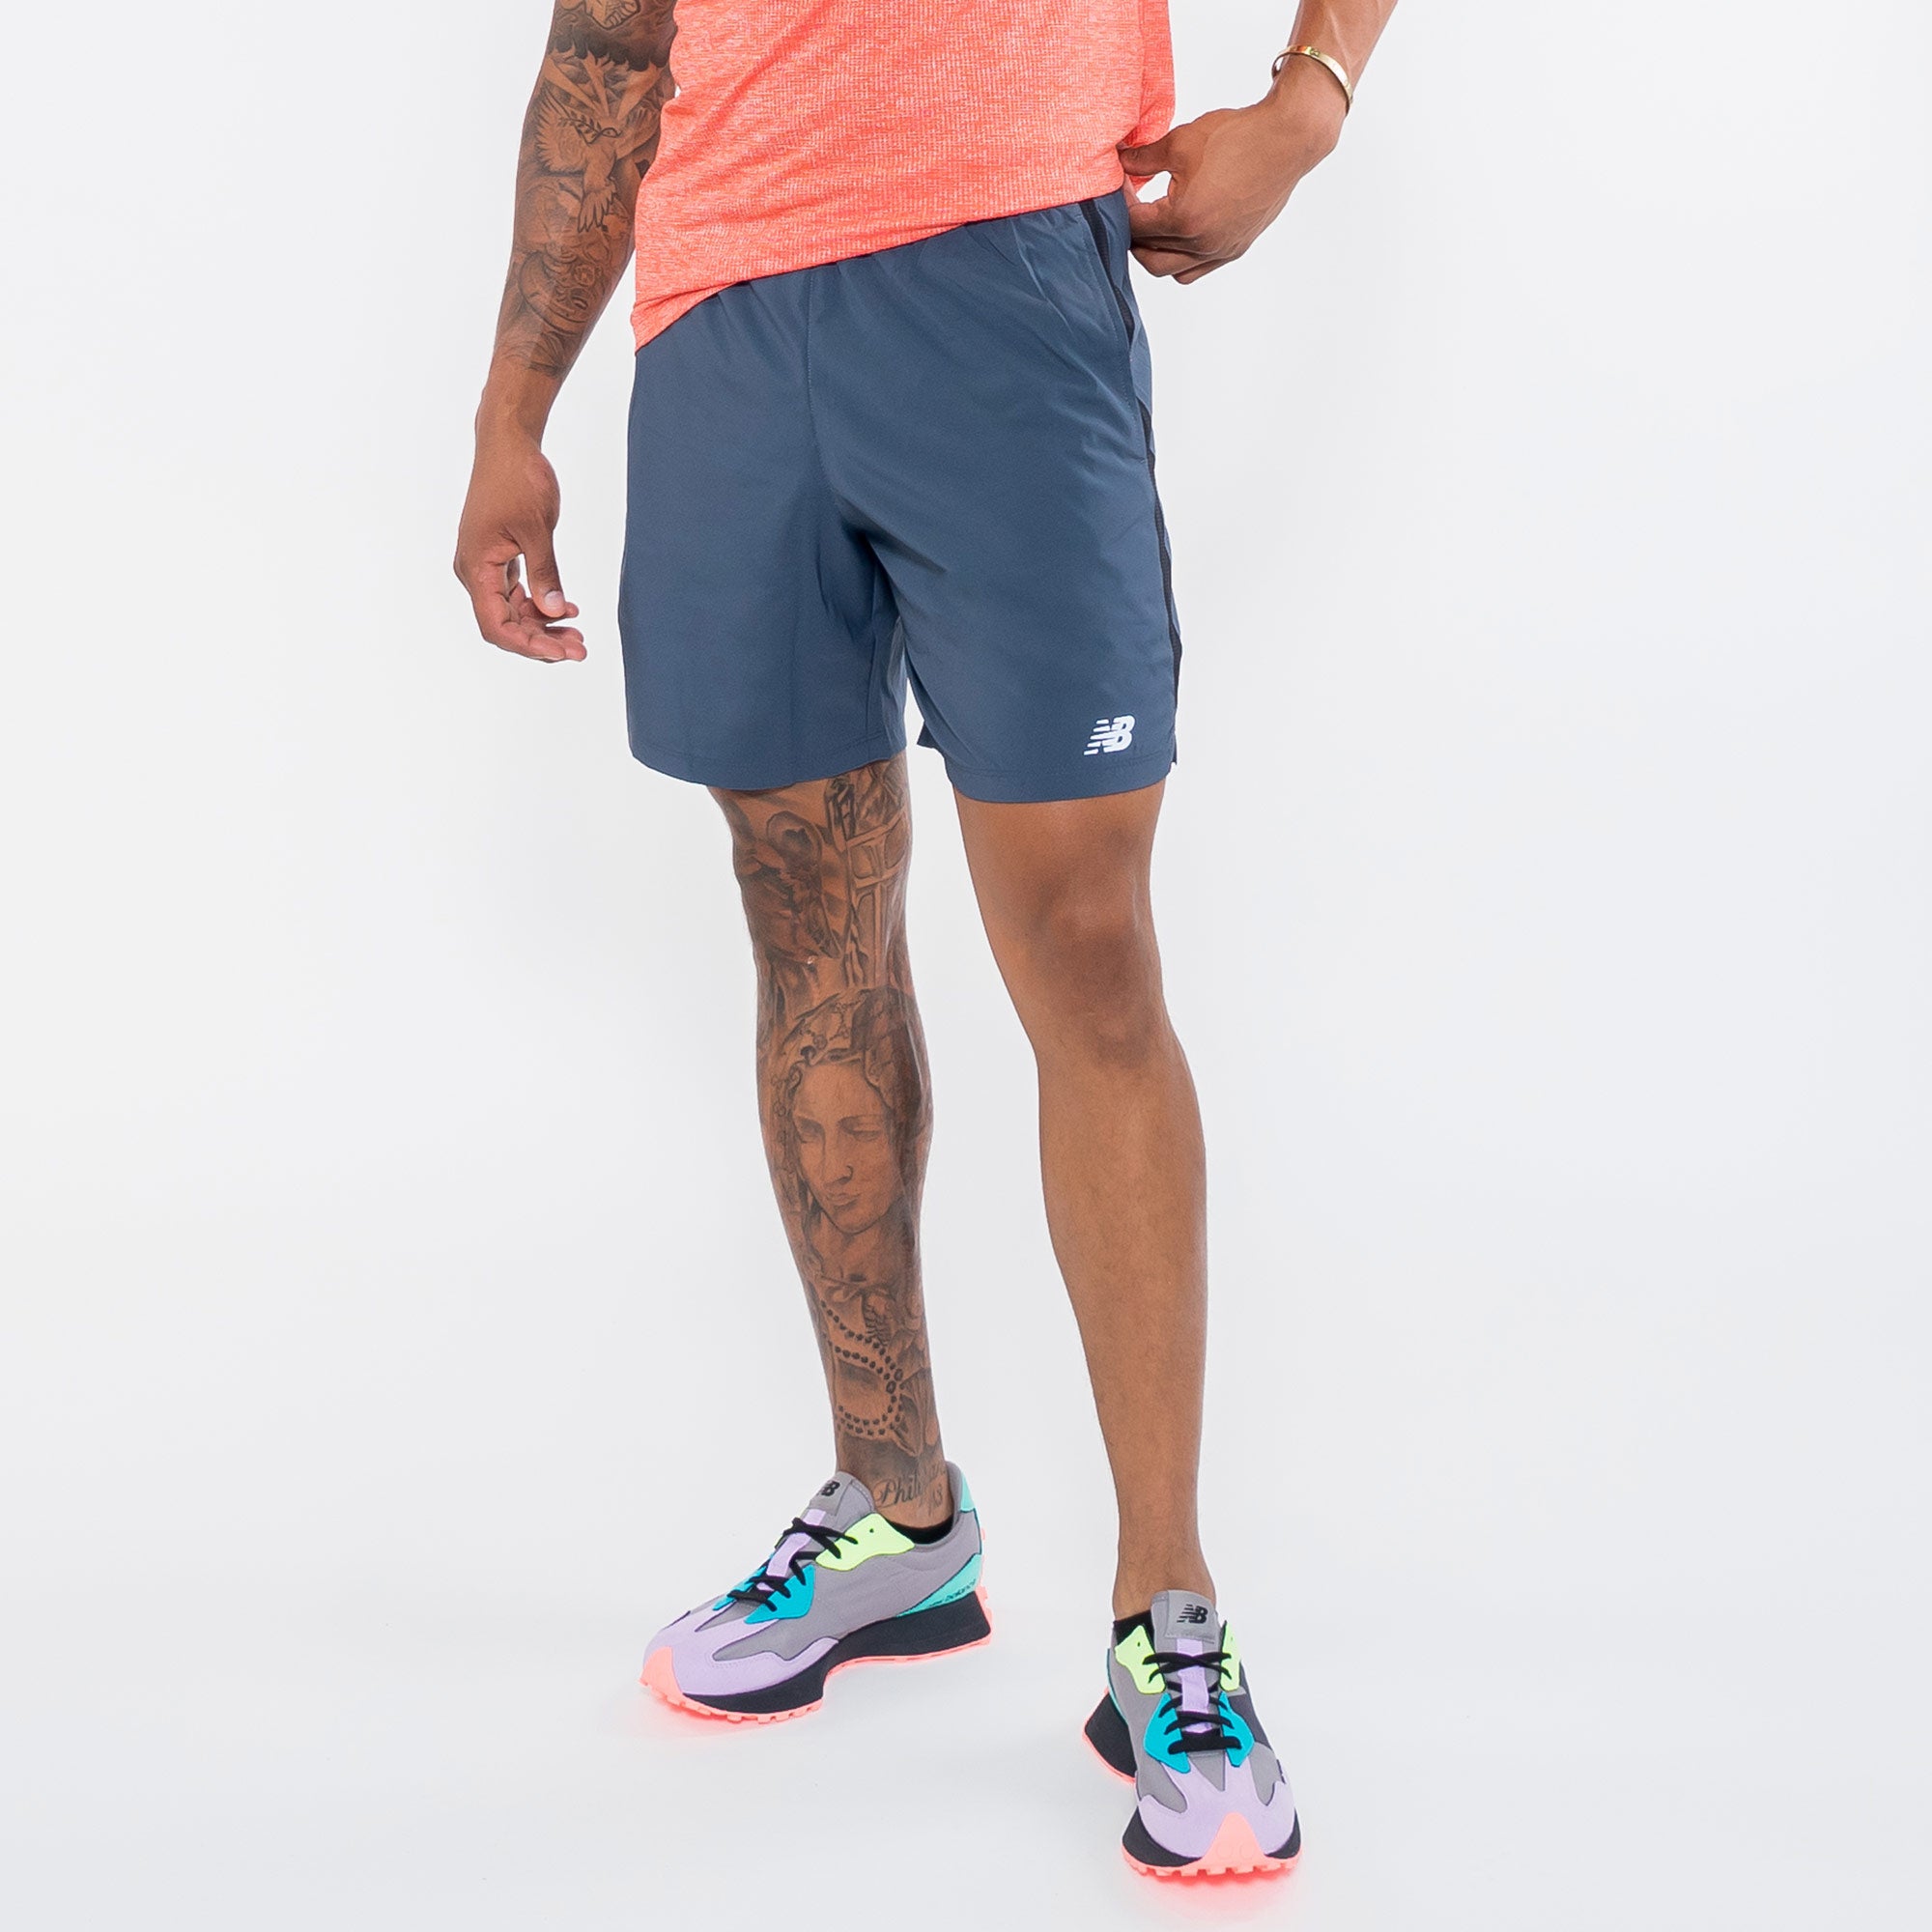 New Balance Accelerate 7 In Short